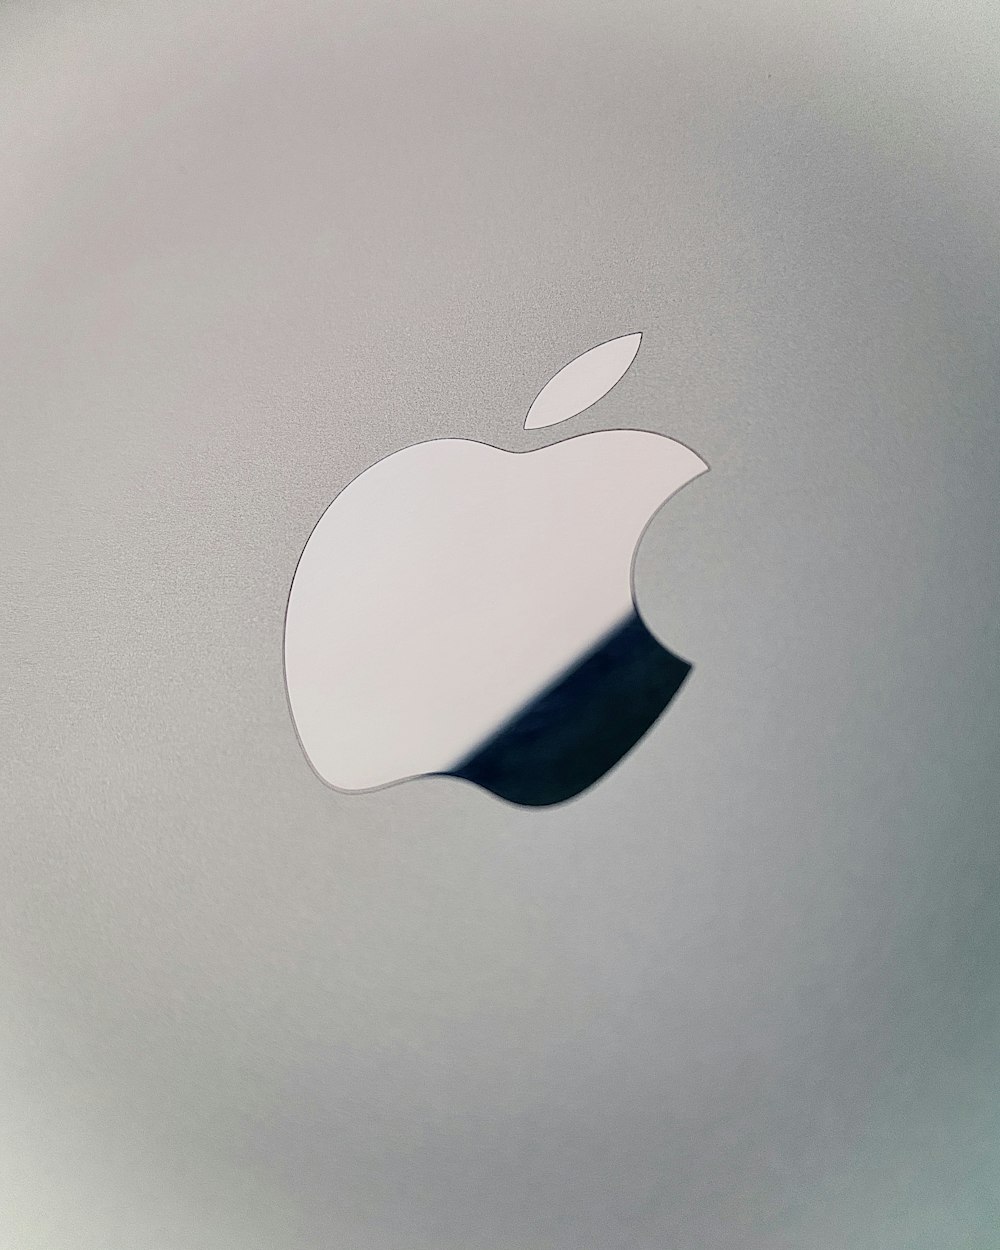 Iphone Logo Pictures Download Free Images On Unsplash